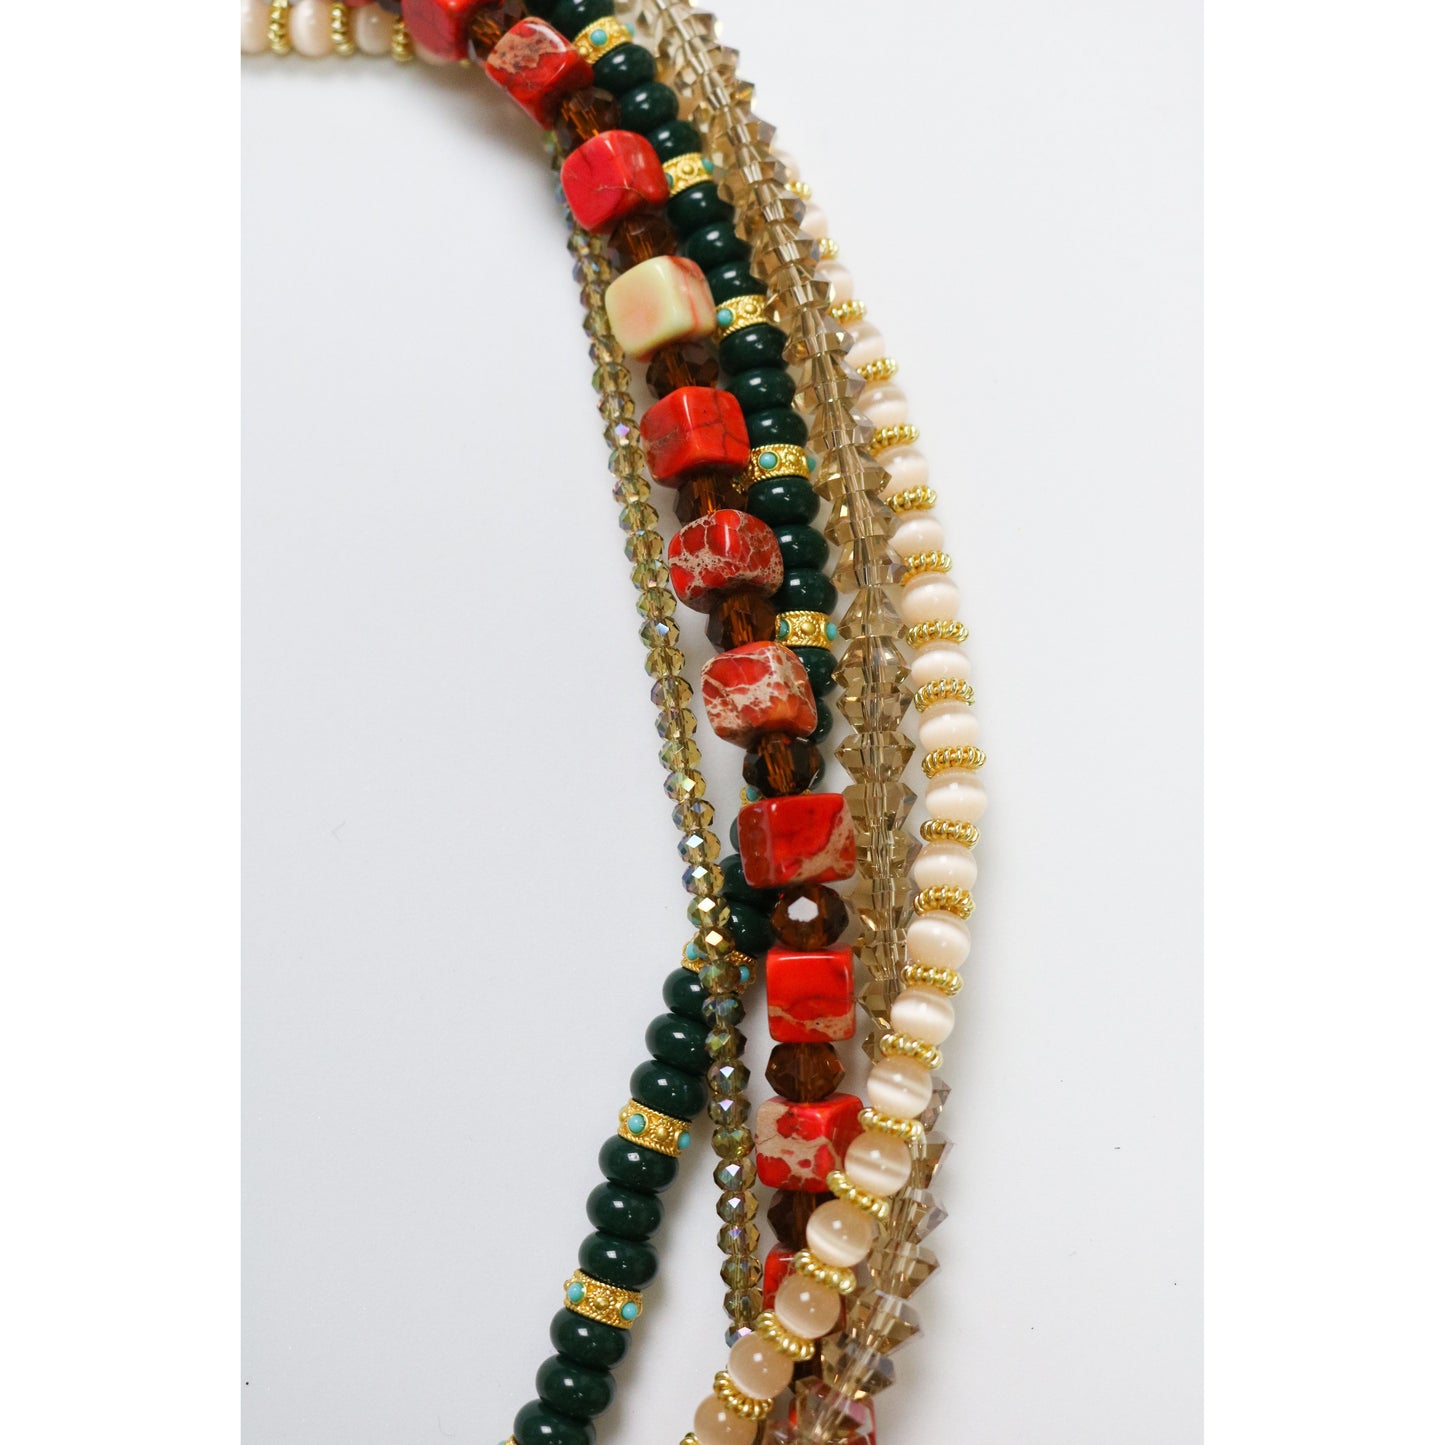 The Tigress Beaded Necklace